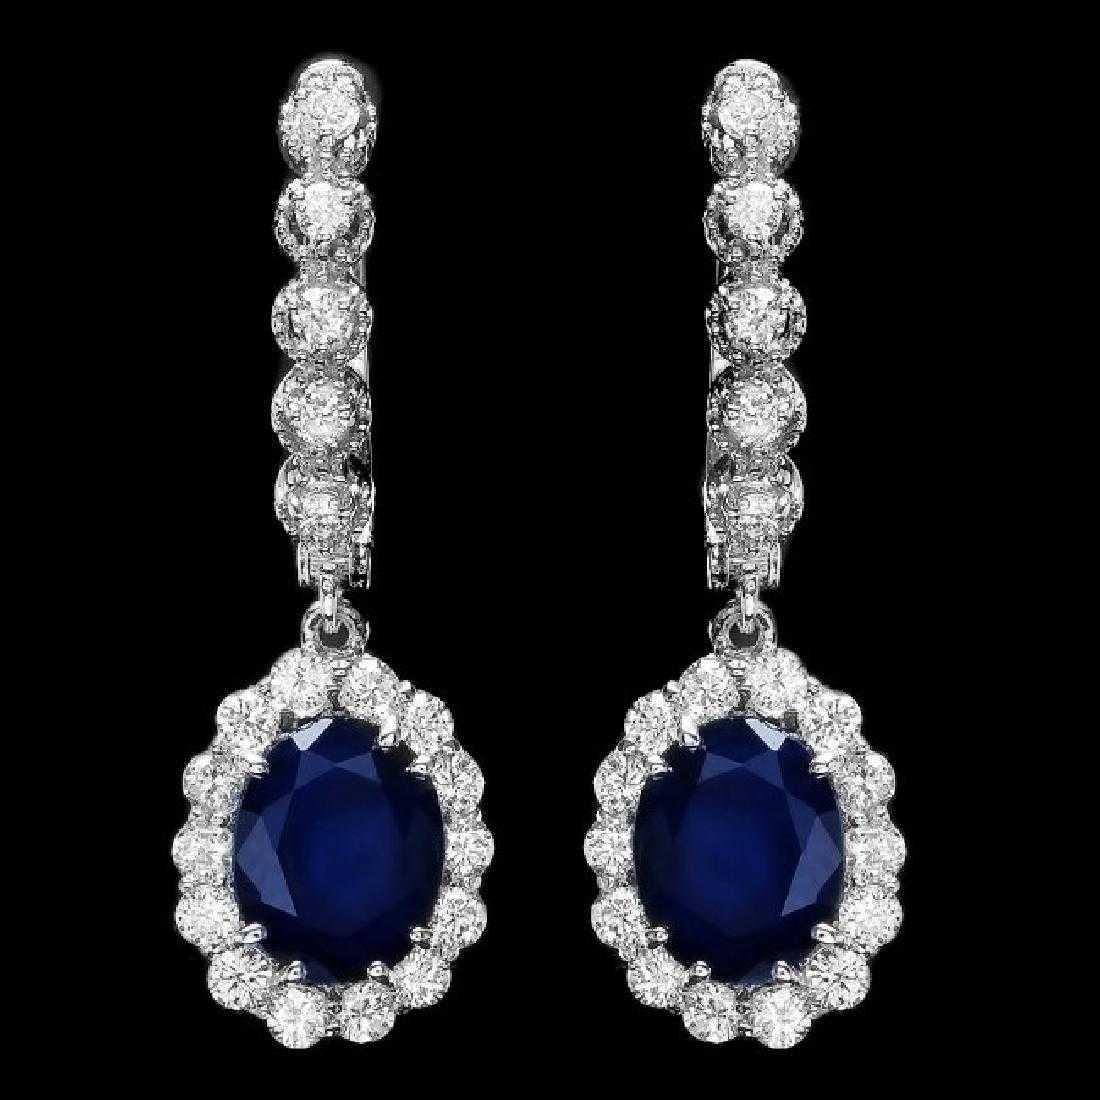 14K White Gold 5.32ct Sapphire and 1.06ct Diamond Earrings